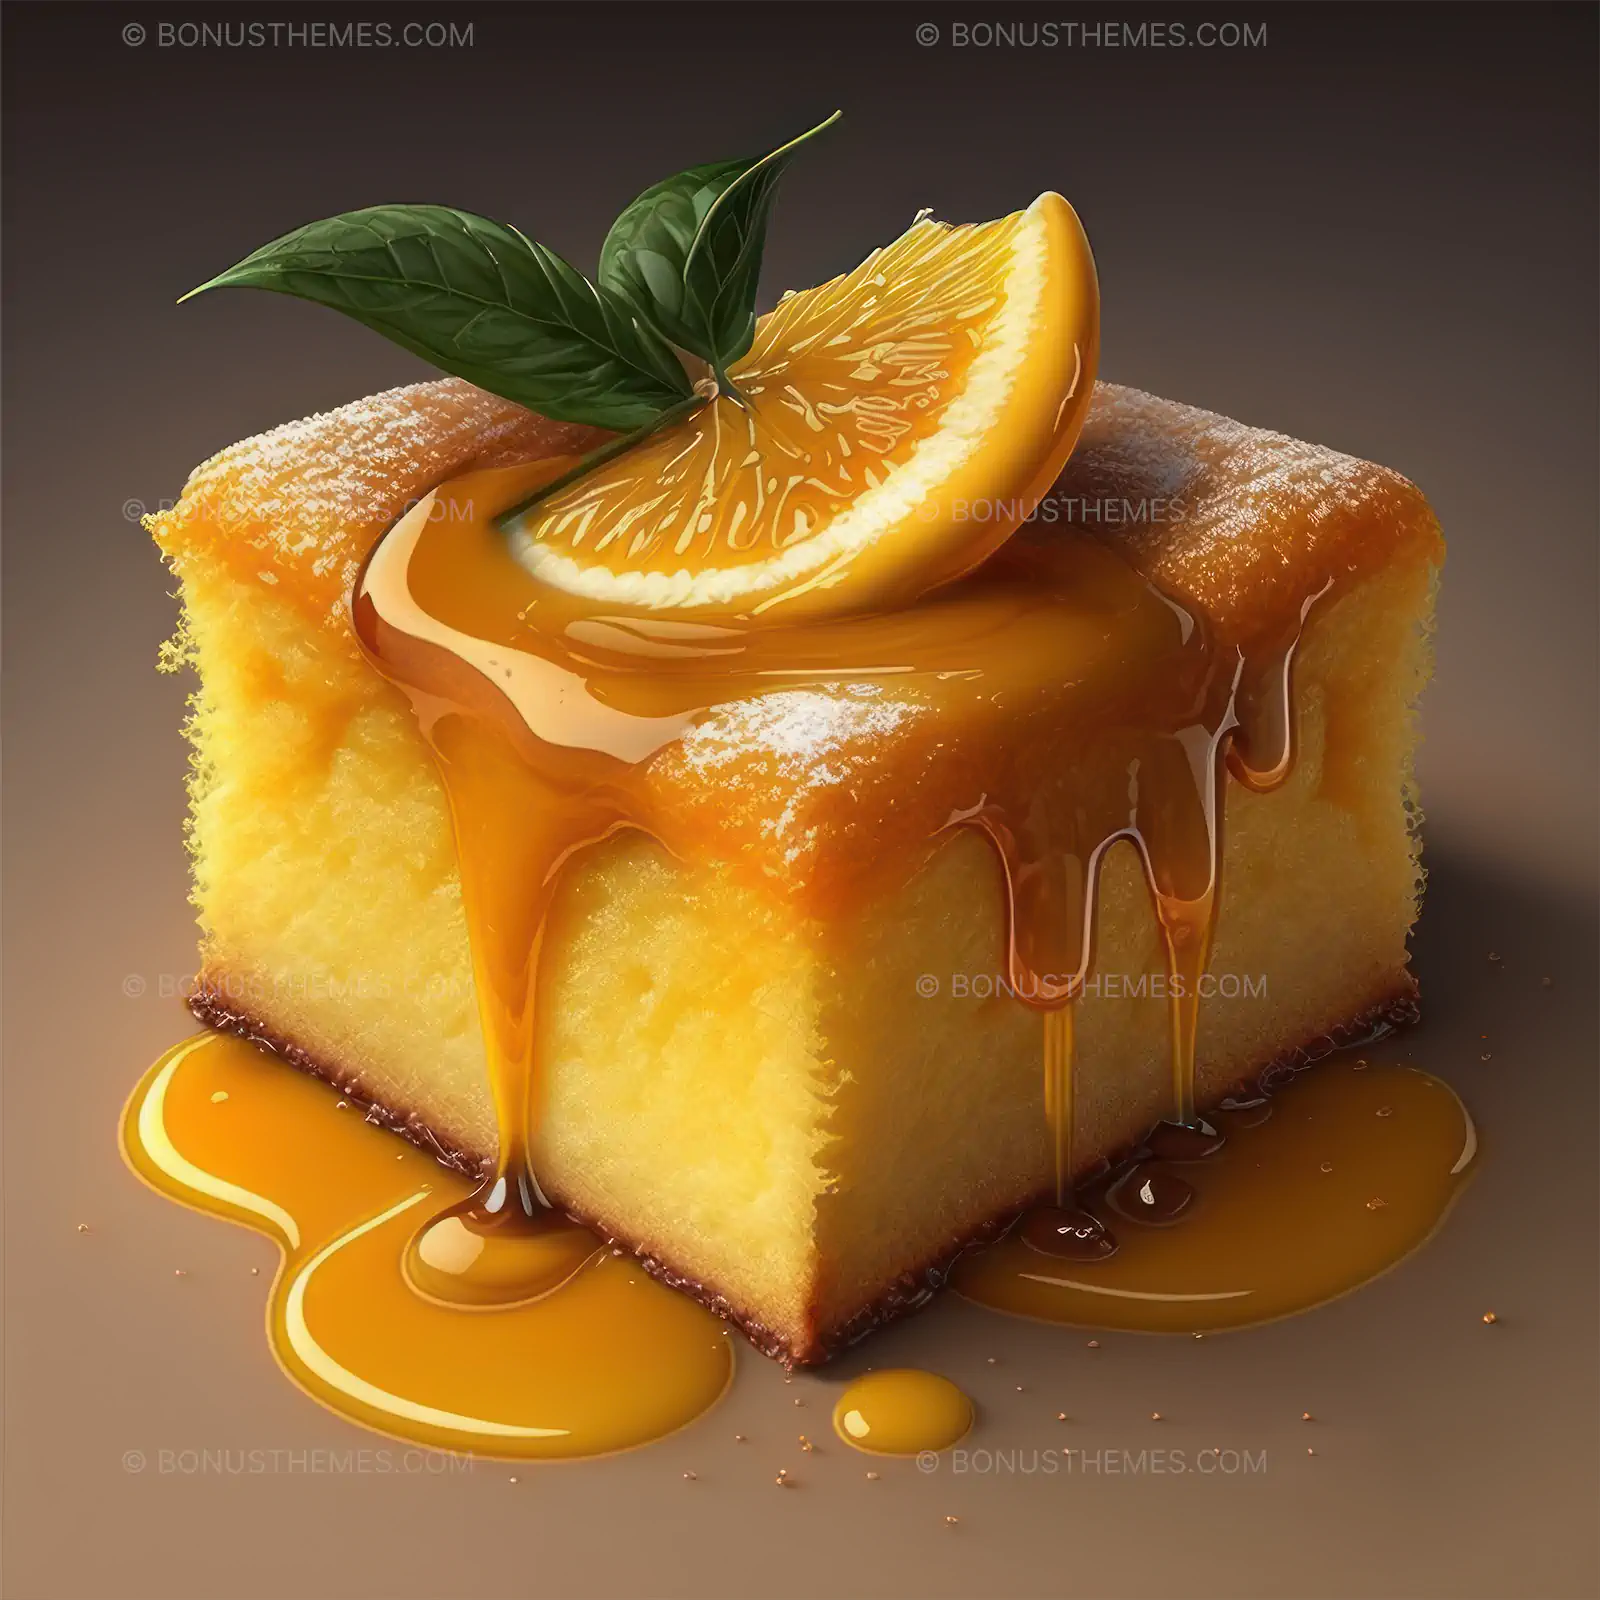 Revani, a semolina cake soaked in sweet syrup with orange